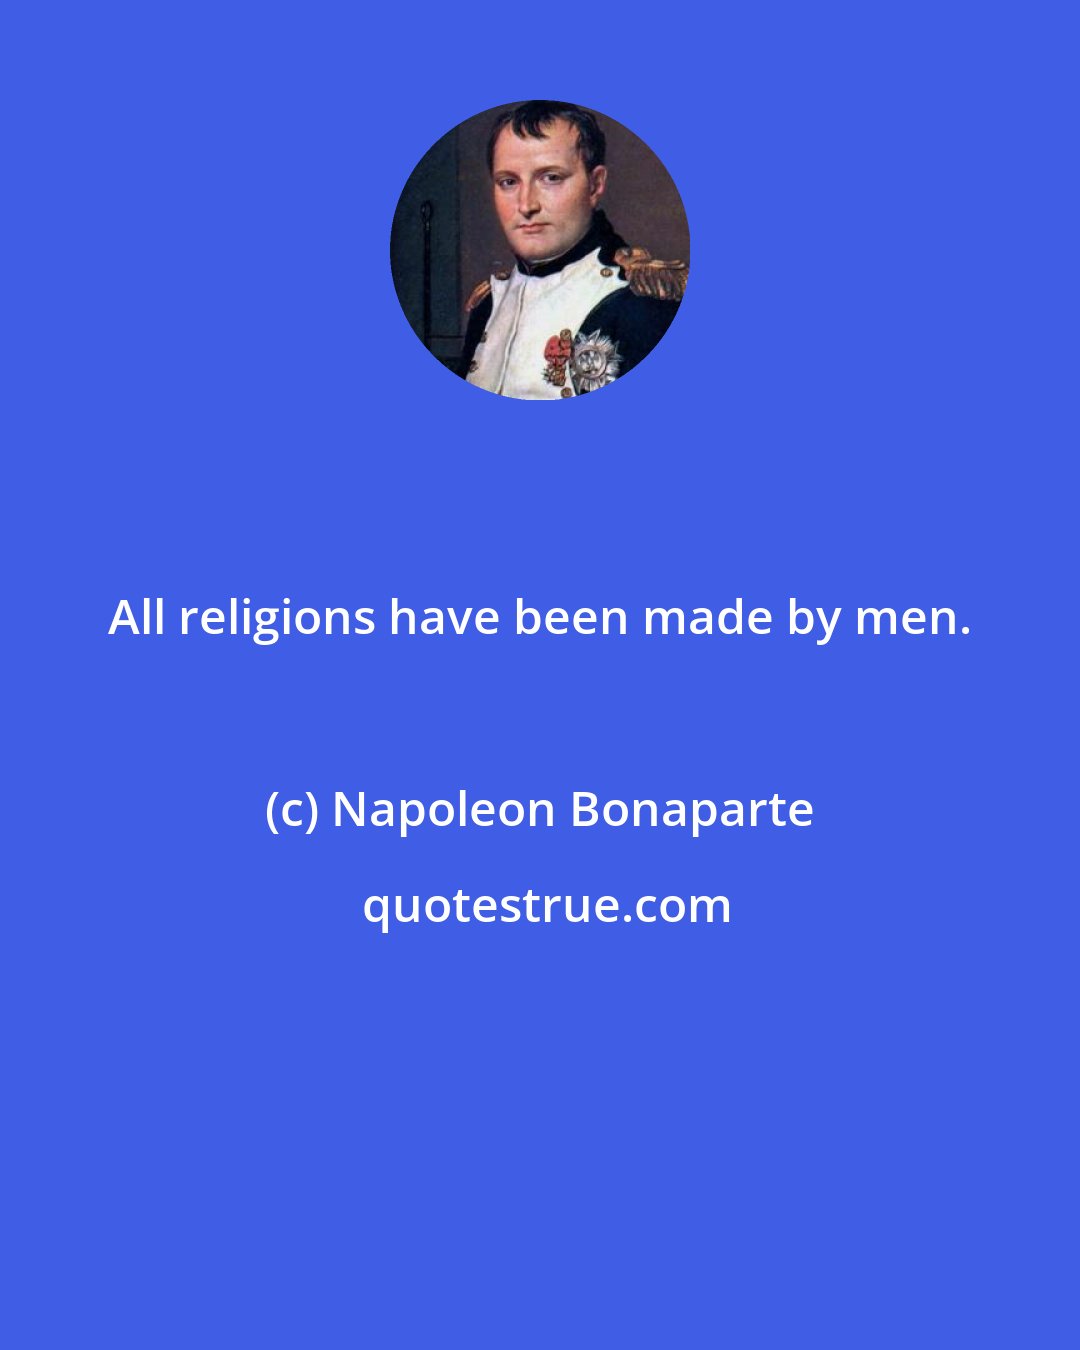 Napoleon Bonaparte: All religions have been made by men.